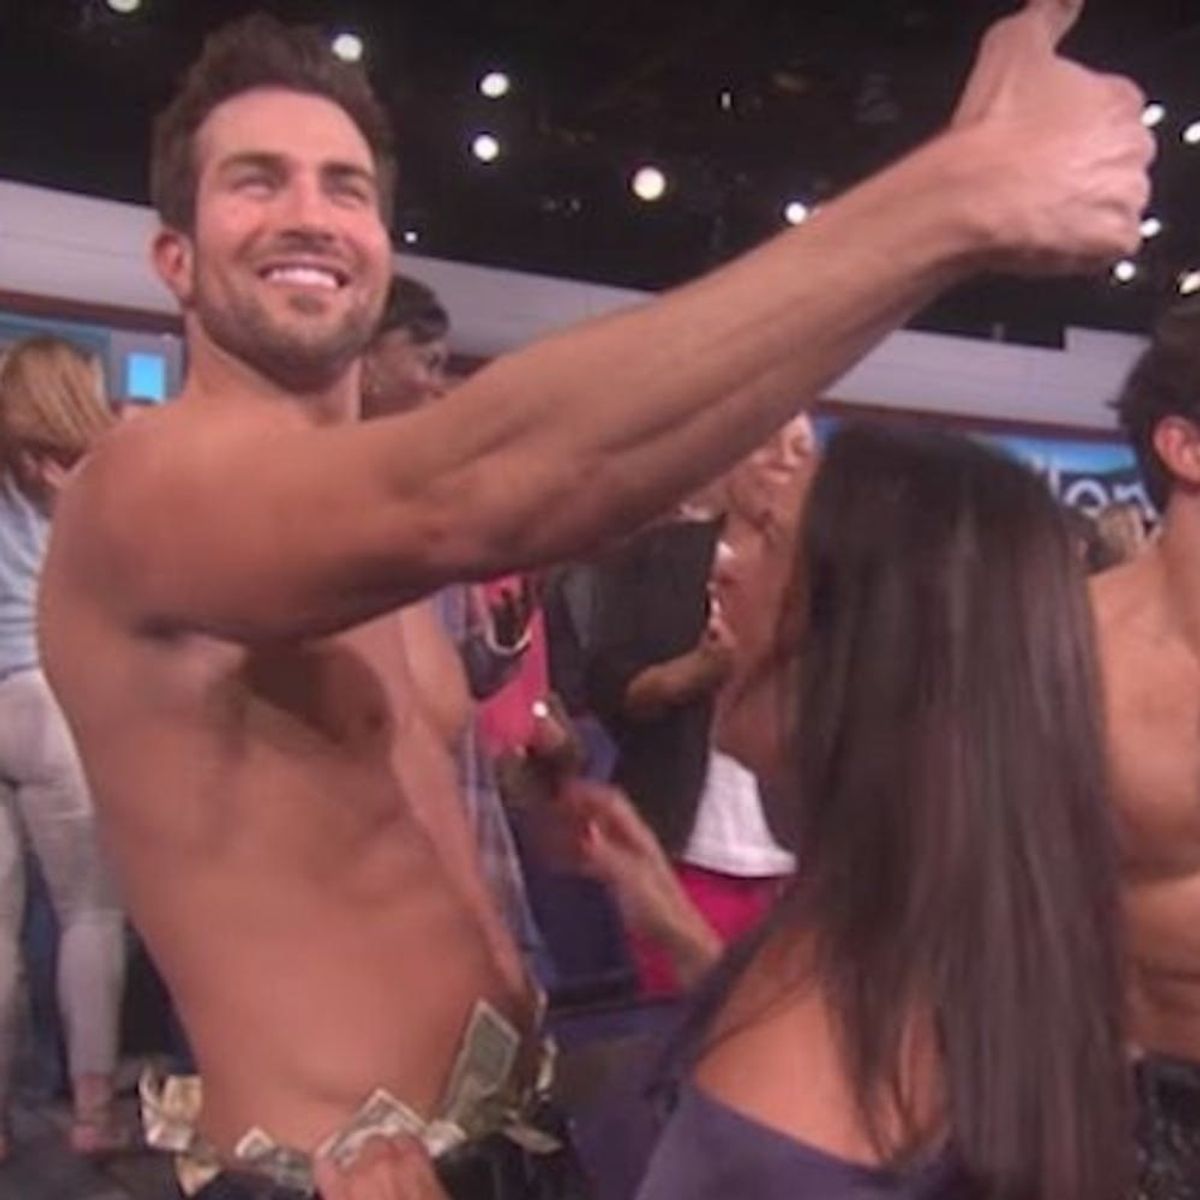 The Bachelorette’s Group Date on Ellen Saw the Guys Stripping Down for Their Best Magic Mike Moves